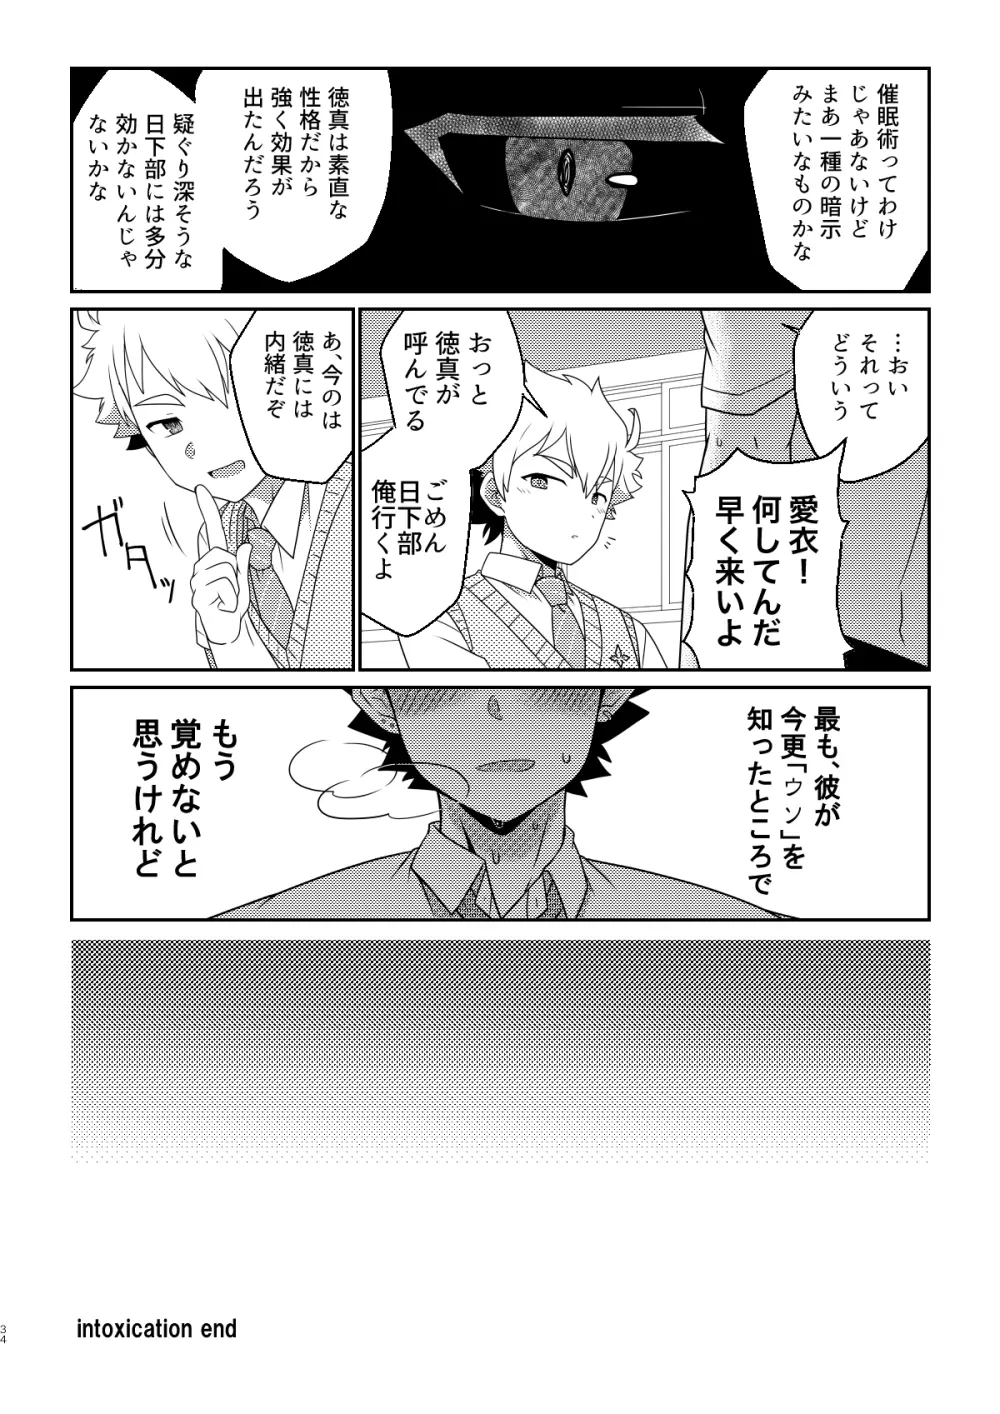 intoxication Page.33